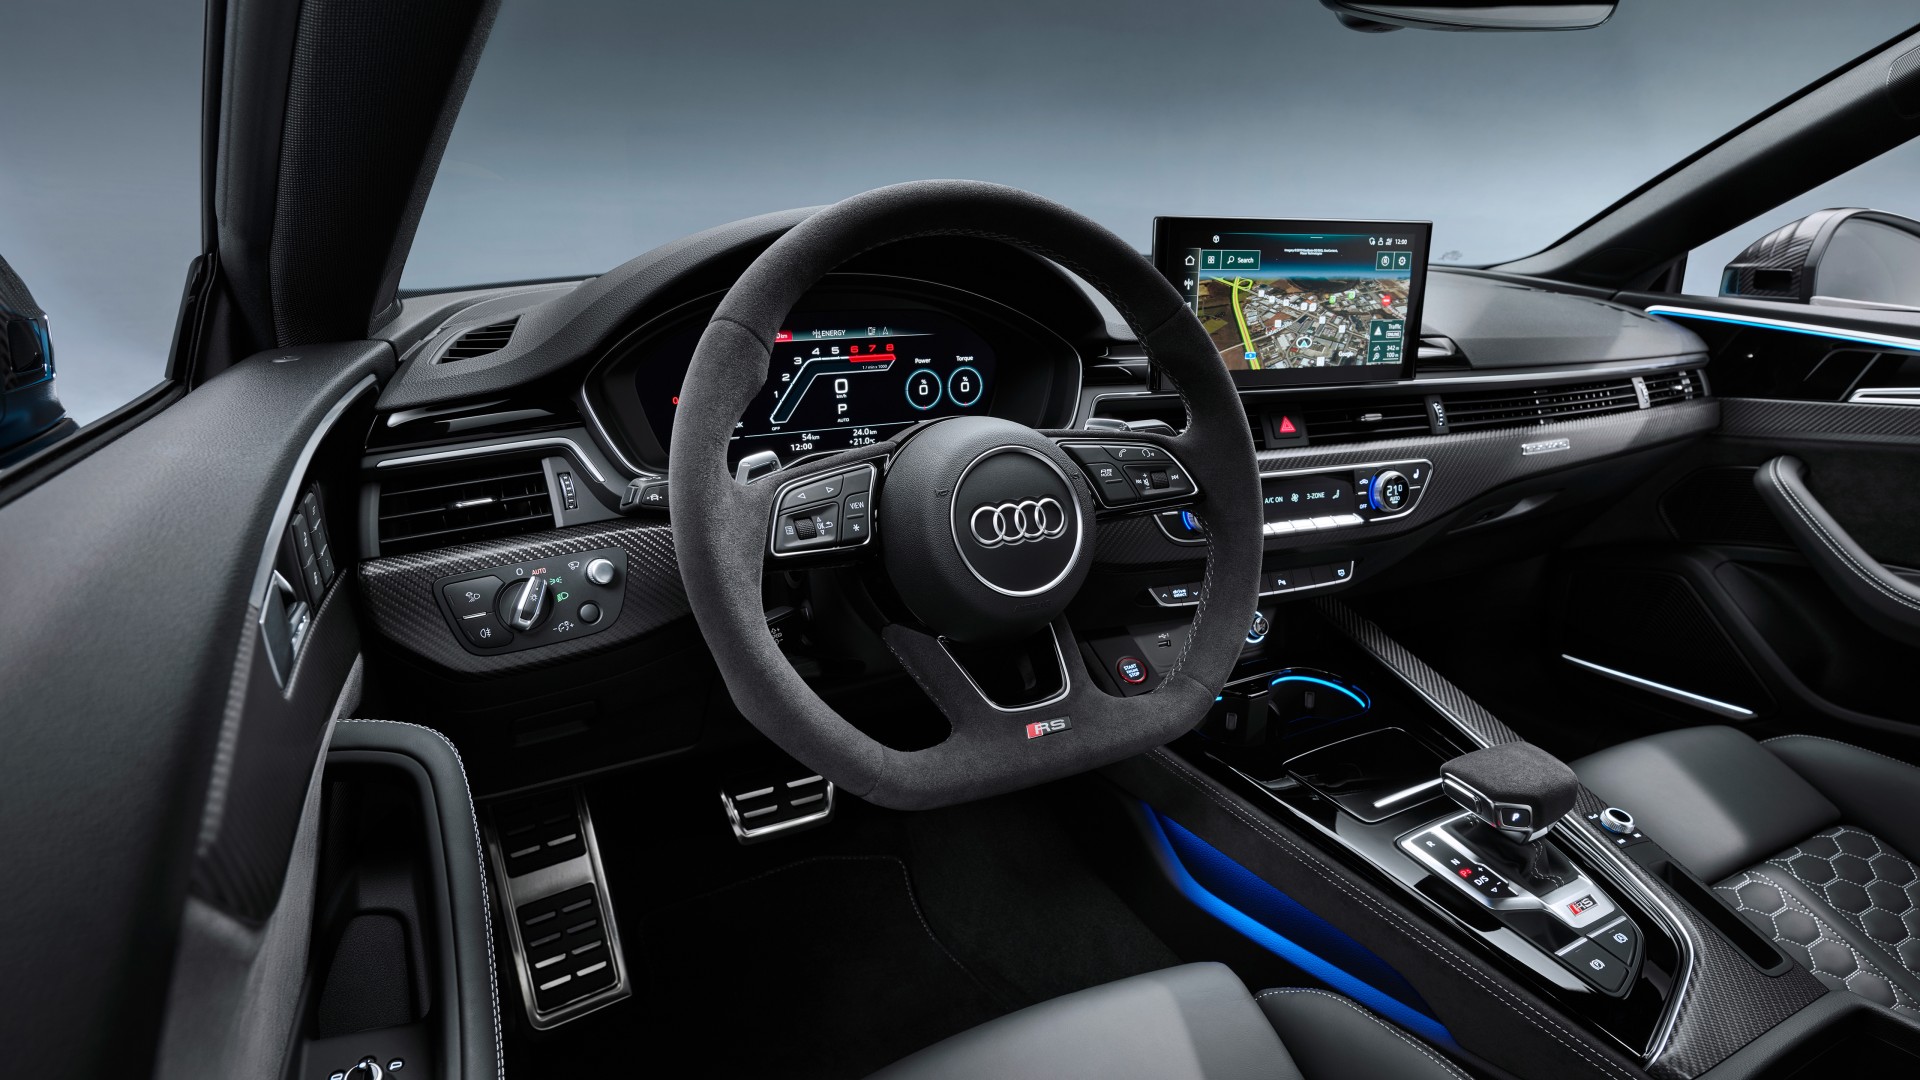 Audi RS 5 Coupe 2019 4K Interior Wallpaper | HD Car Wallpapers | ID #13896